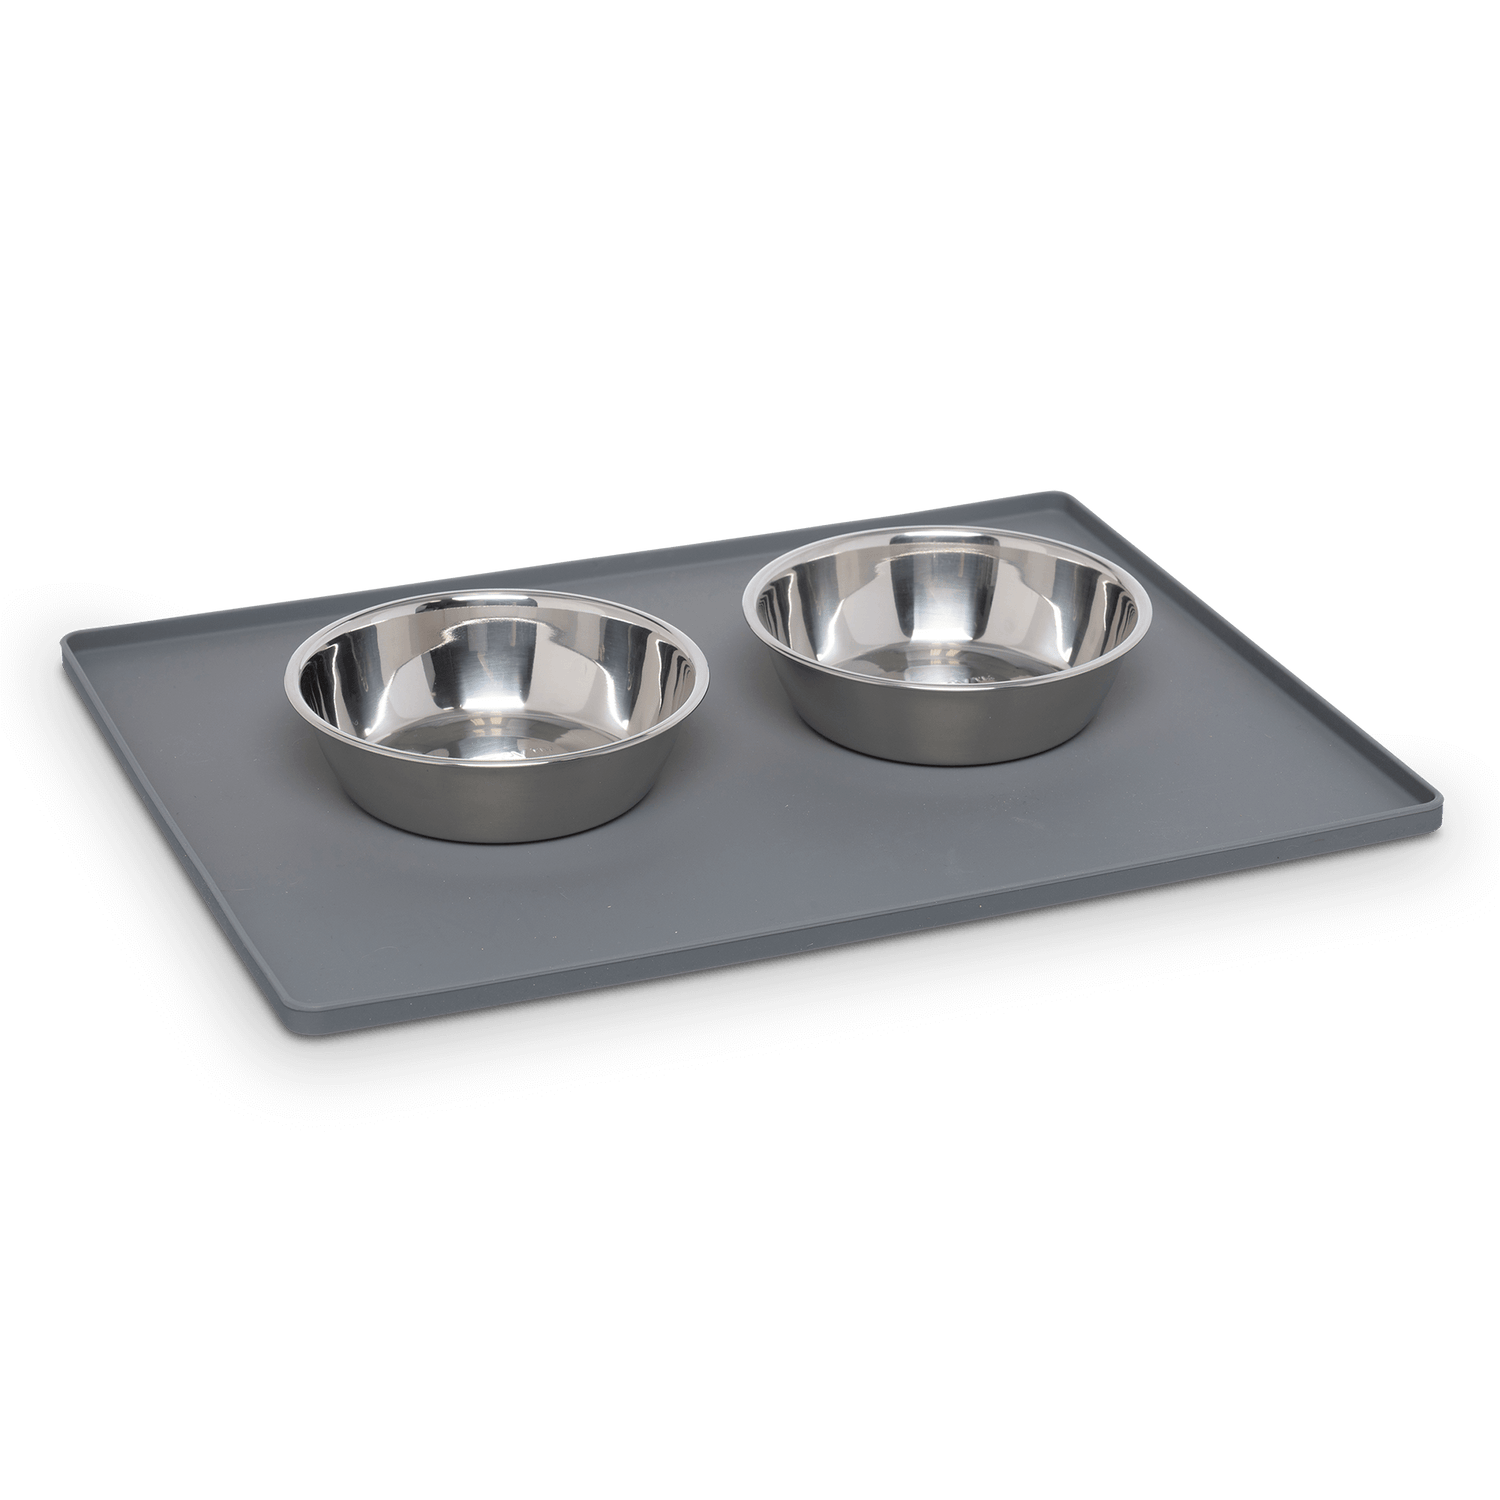 Cat or Dog feeder mat.  Fols up for easy storage and has room for two bowls.  